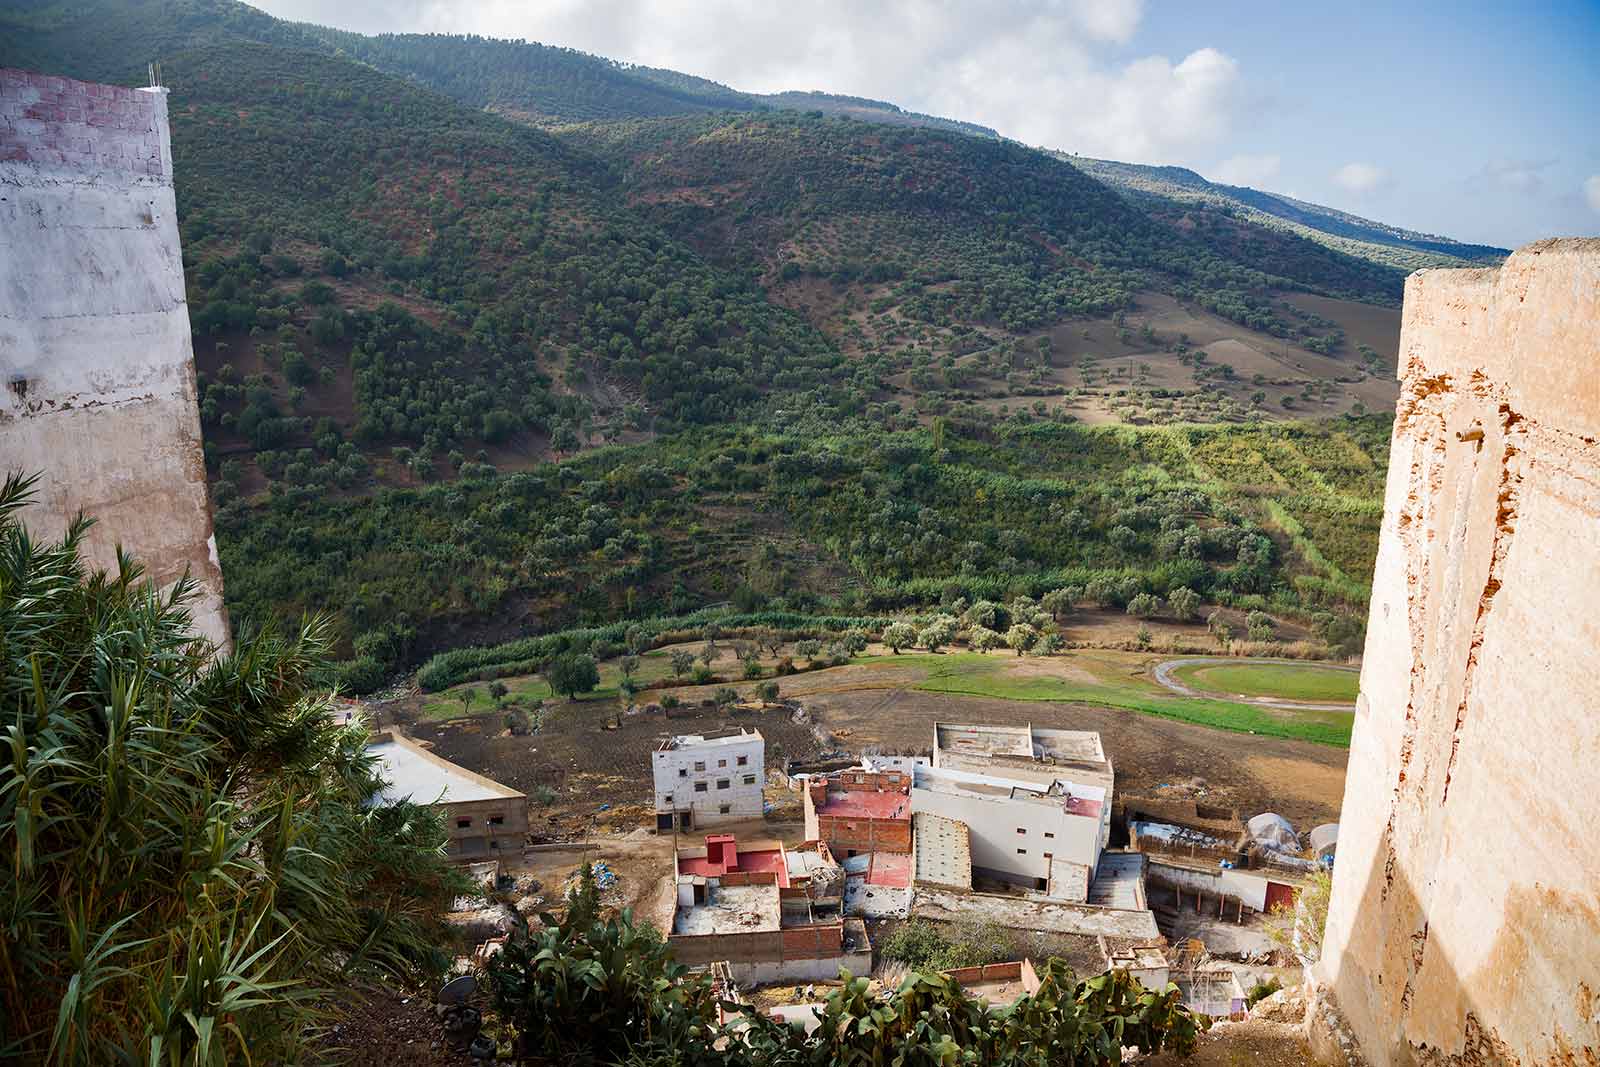 One reason the Romans chose Moulay Idriss was for its potential for making olive oil, which is today the town’s primary product.